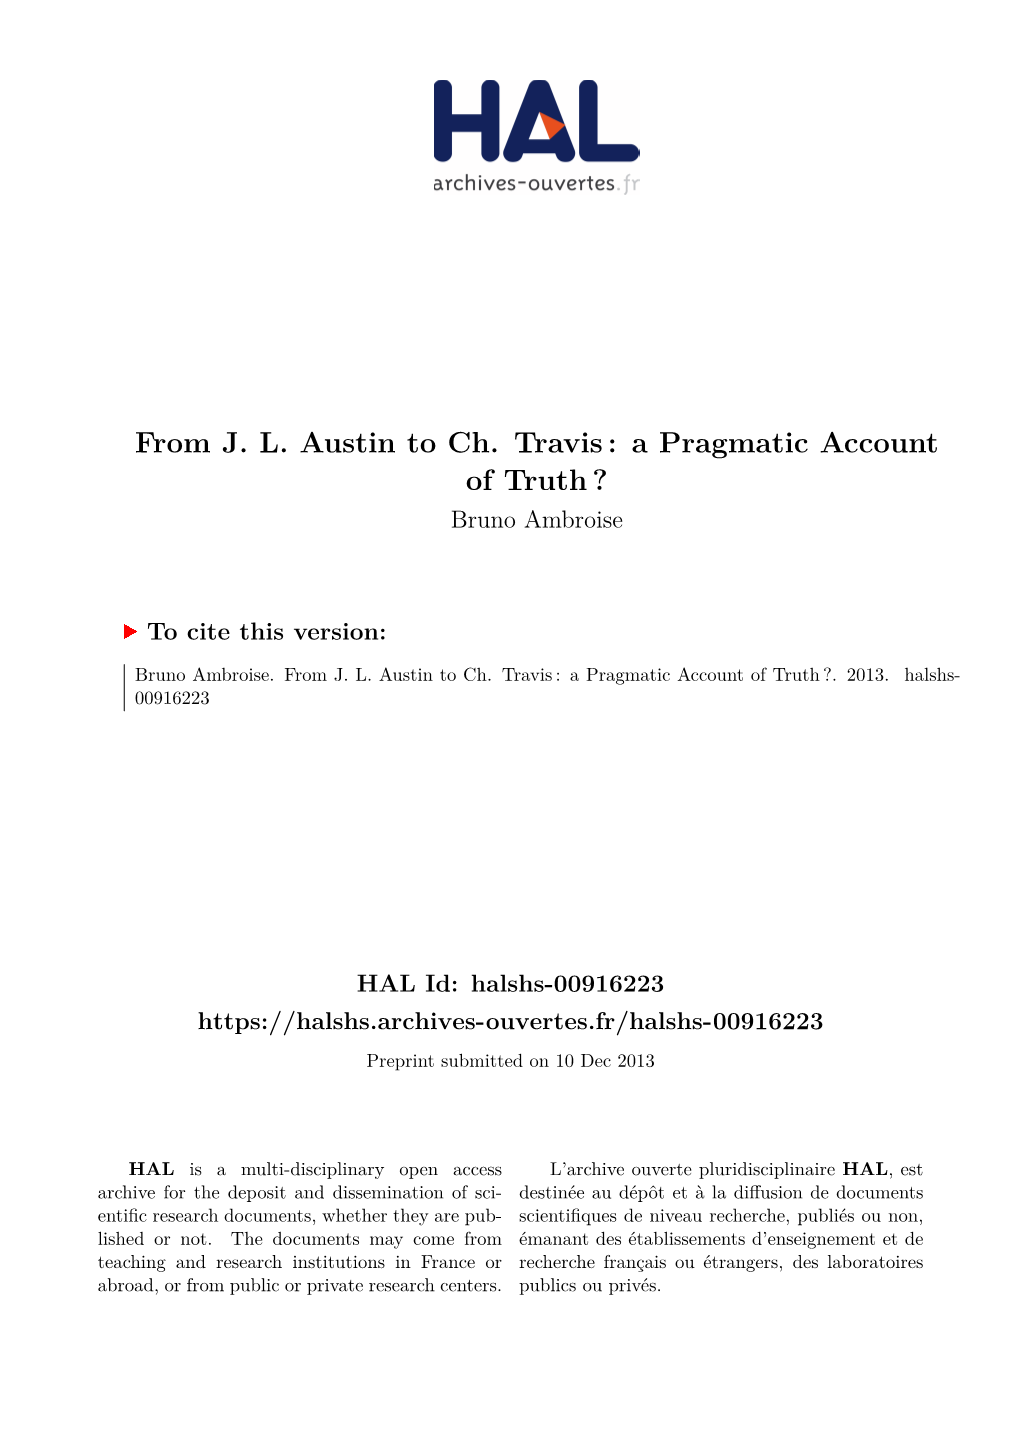 From J. L. Austin to Ch. Travis: a Pragmatic Account of Truth?